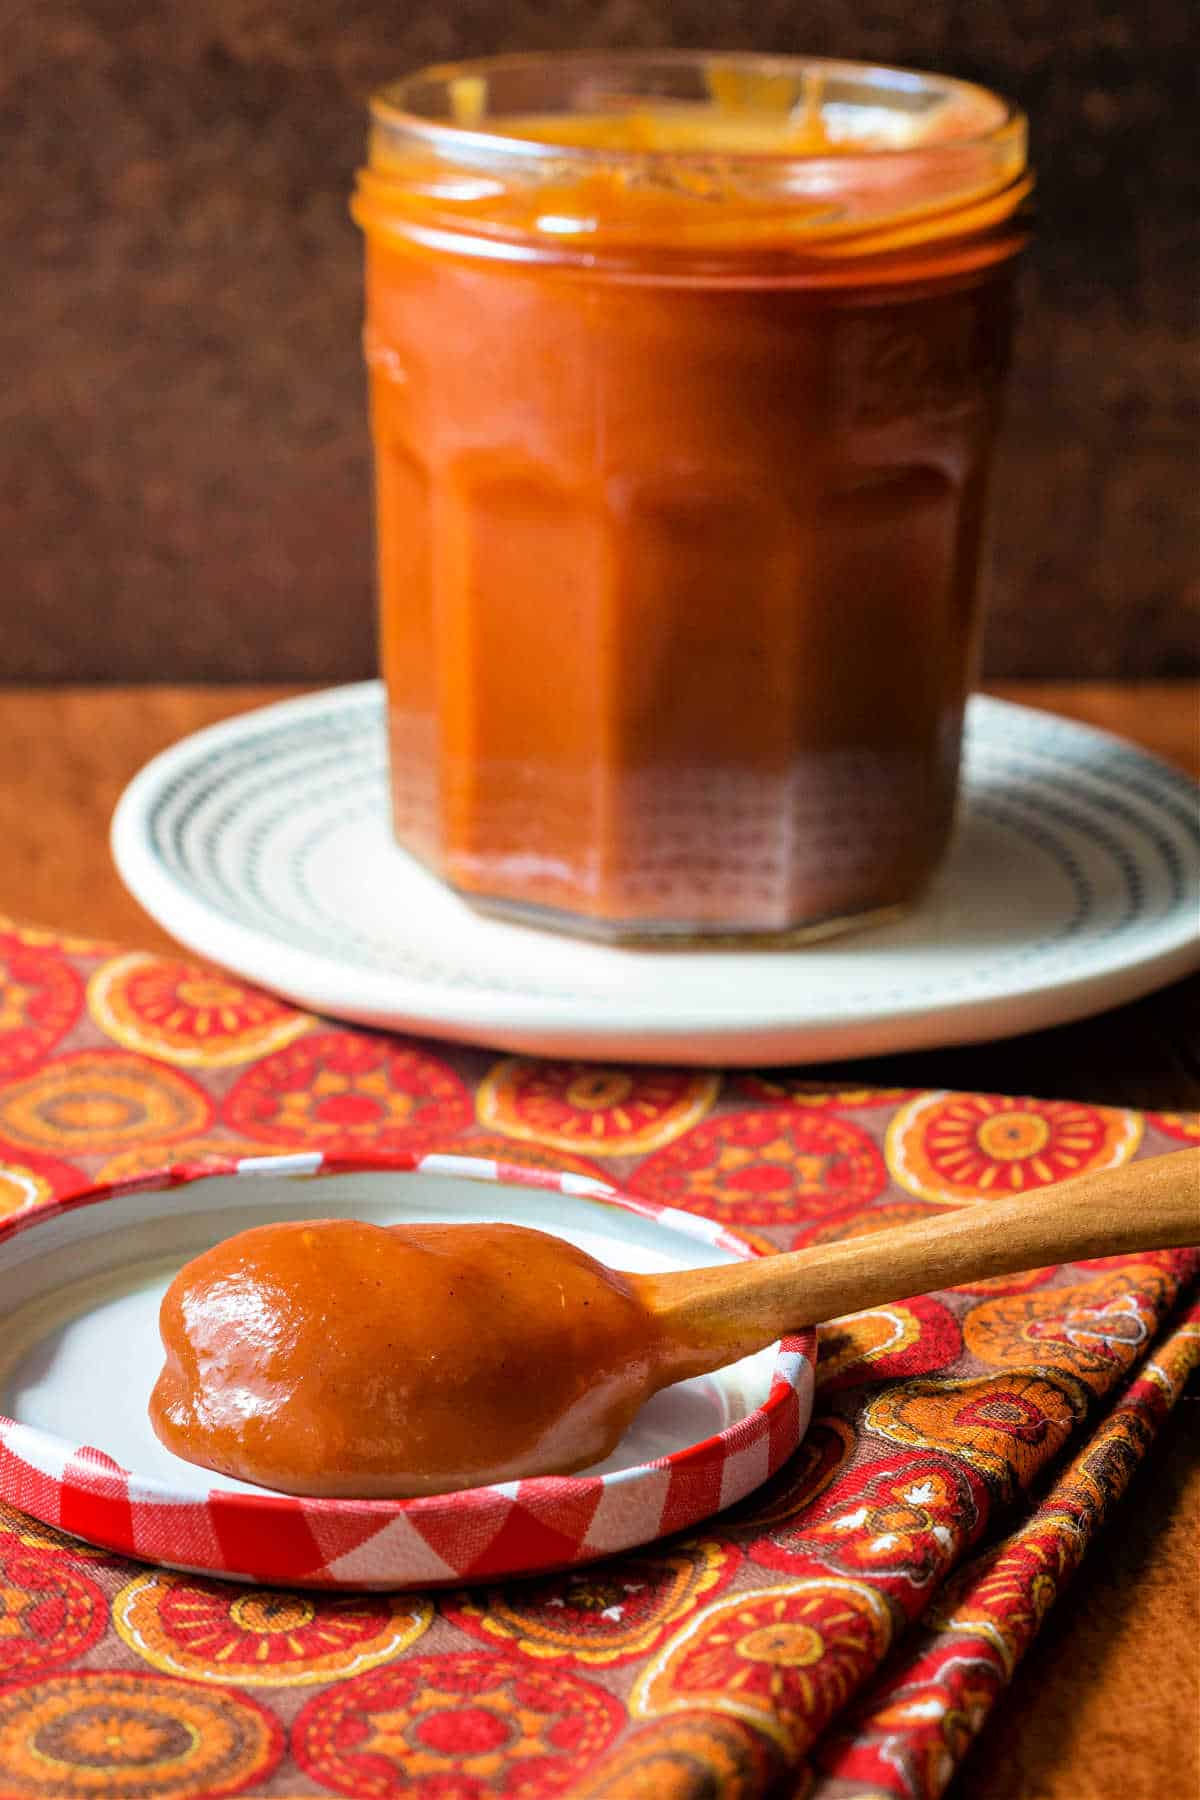 A full jar of deep amber caramel sauce with a spoonful of the sauce resting on the lid of the jar.